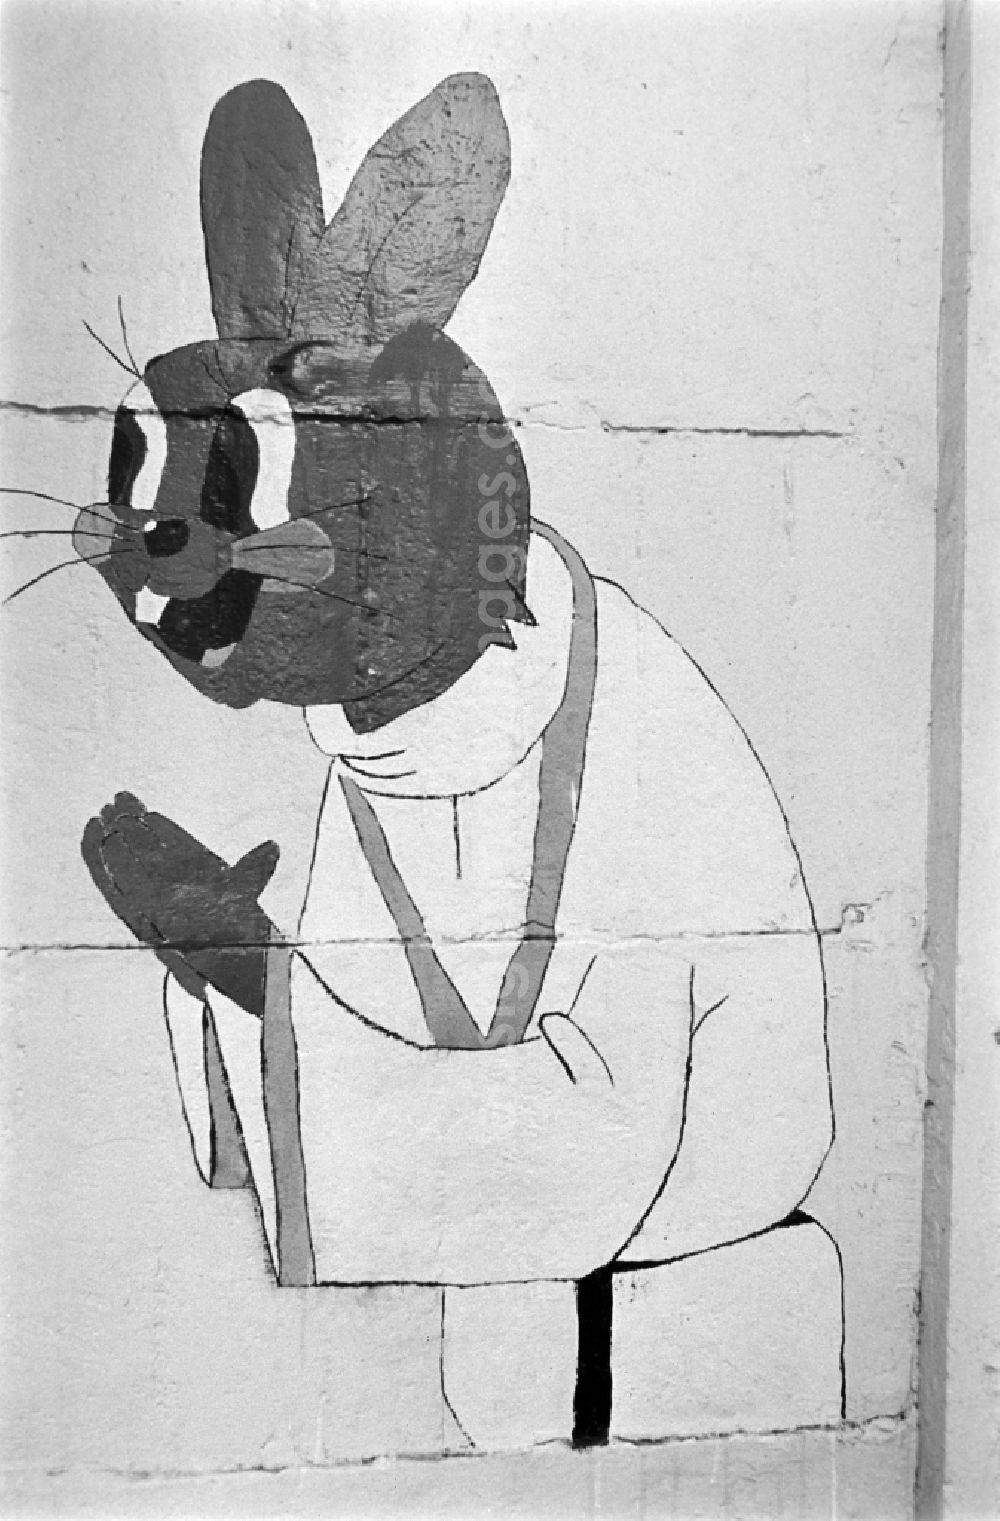 GDR picture archive: Laubusch - Painting in a bus stop in Laubusch in the state Saxony on the territory of the former GDR, German Democratic Republic